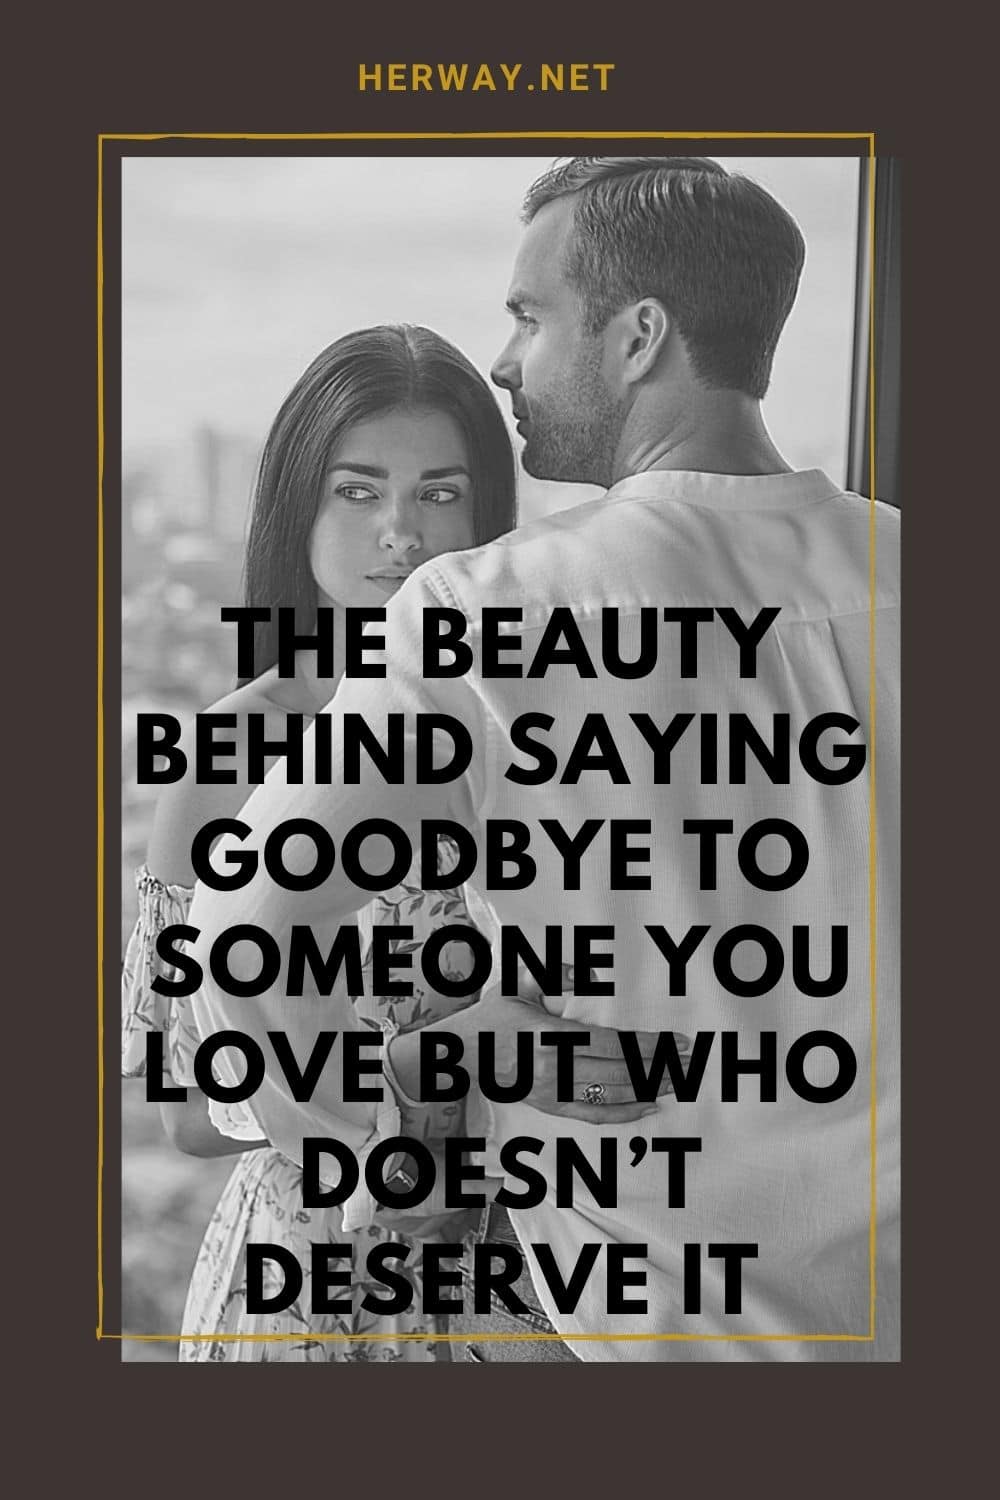 The Beauty Behind Saying Goodbye To Someone You Love But Who Doesn’t Deserve It